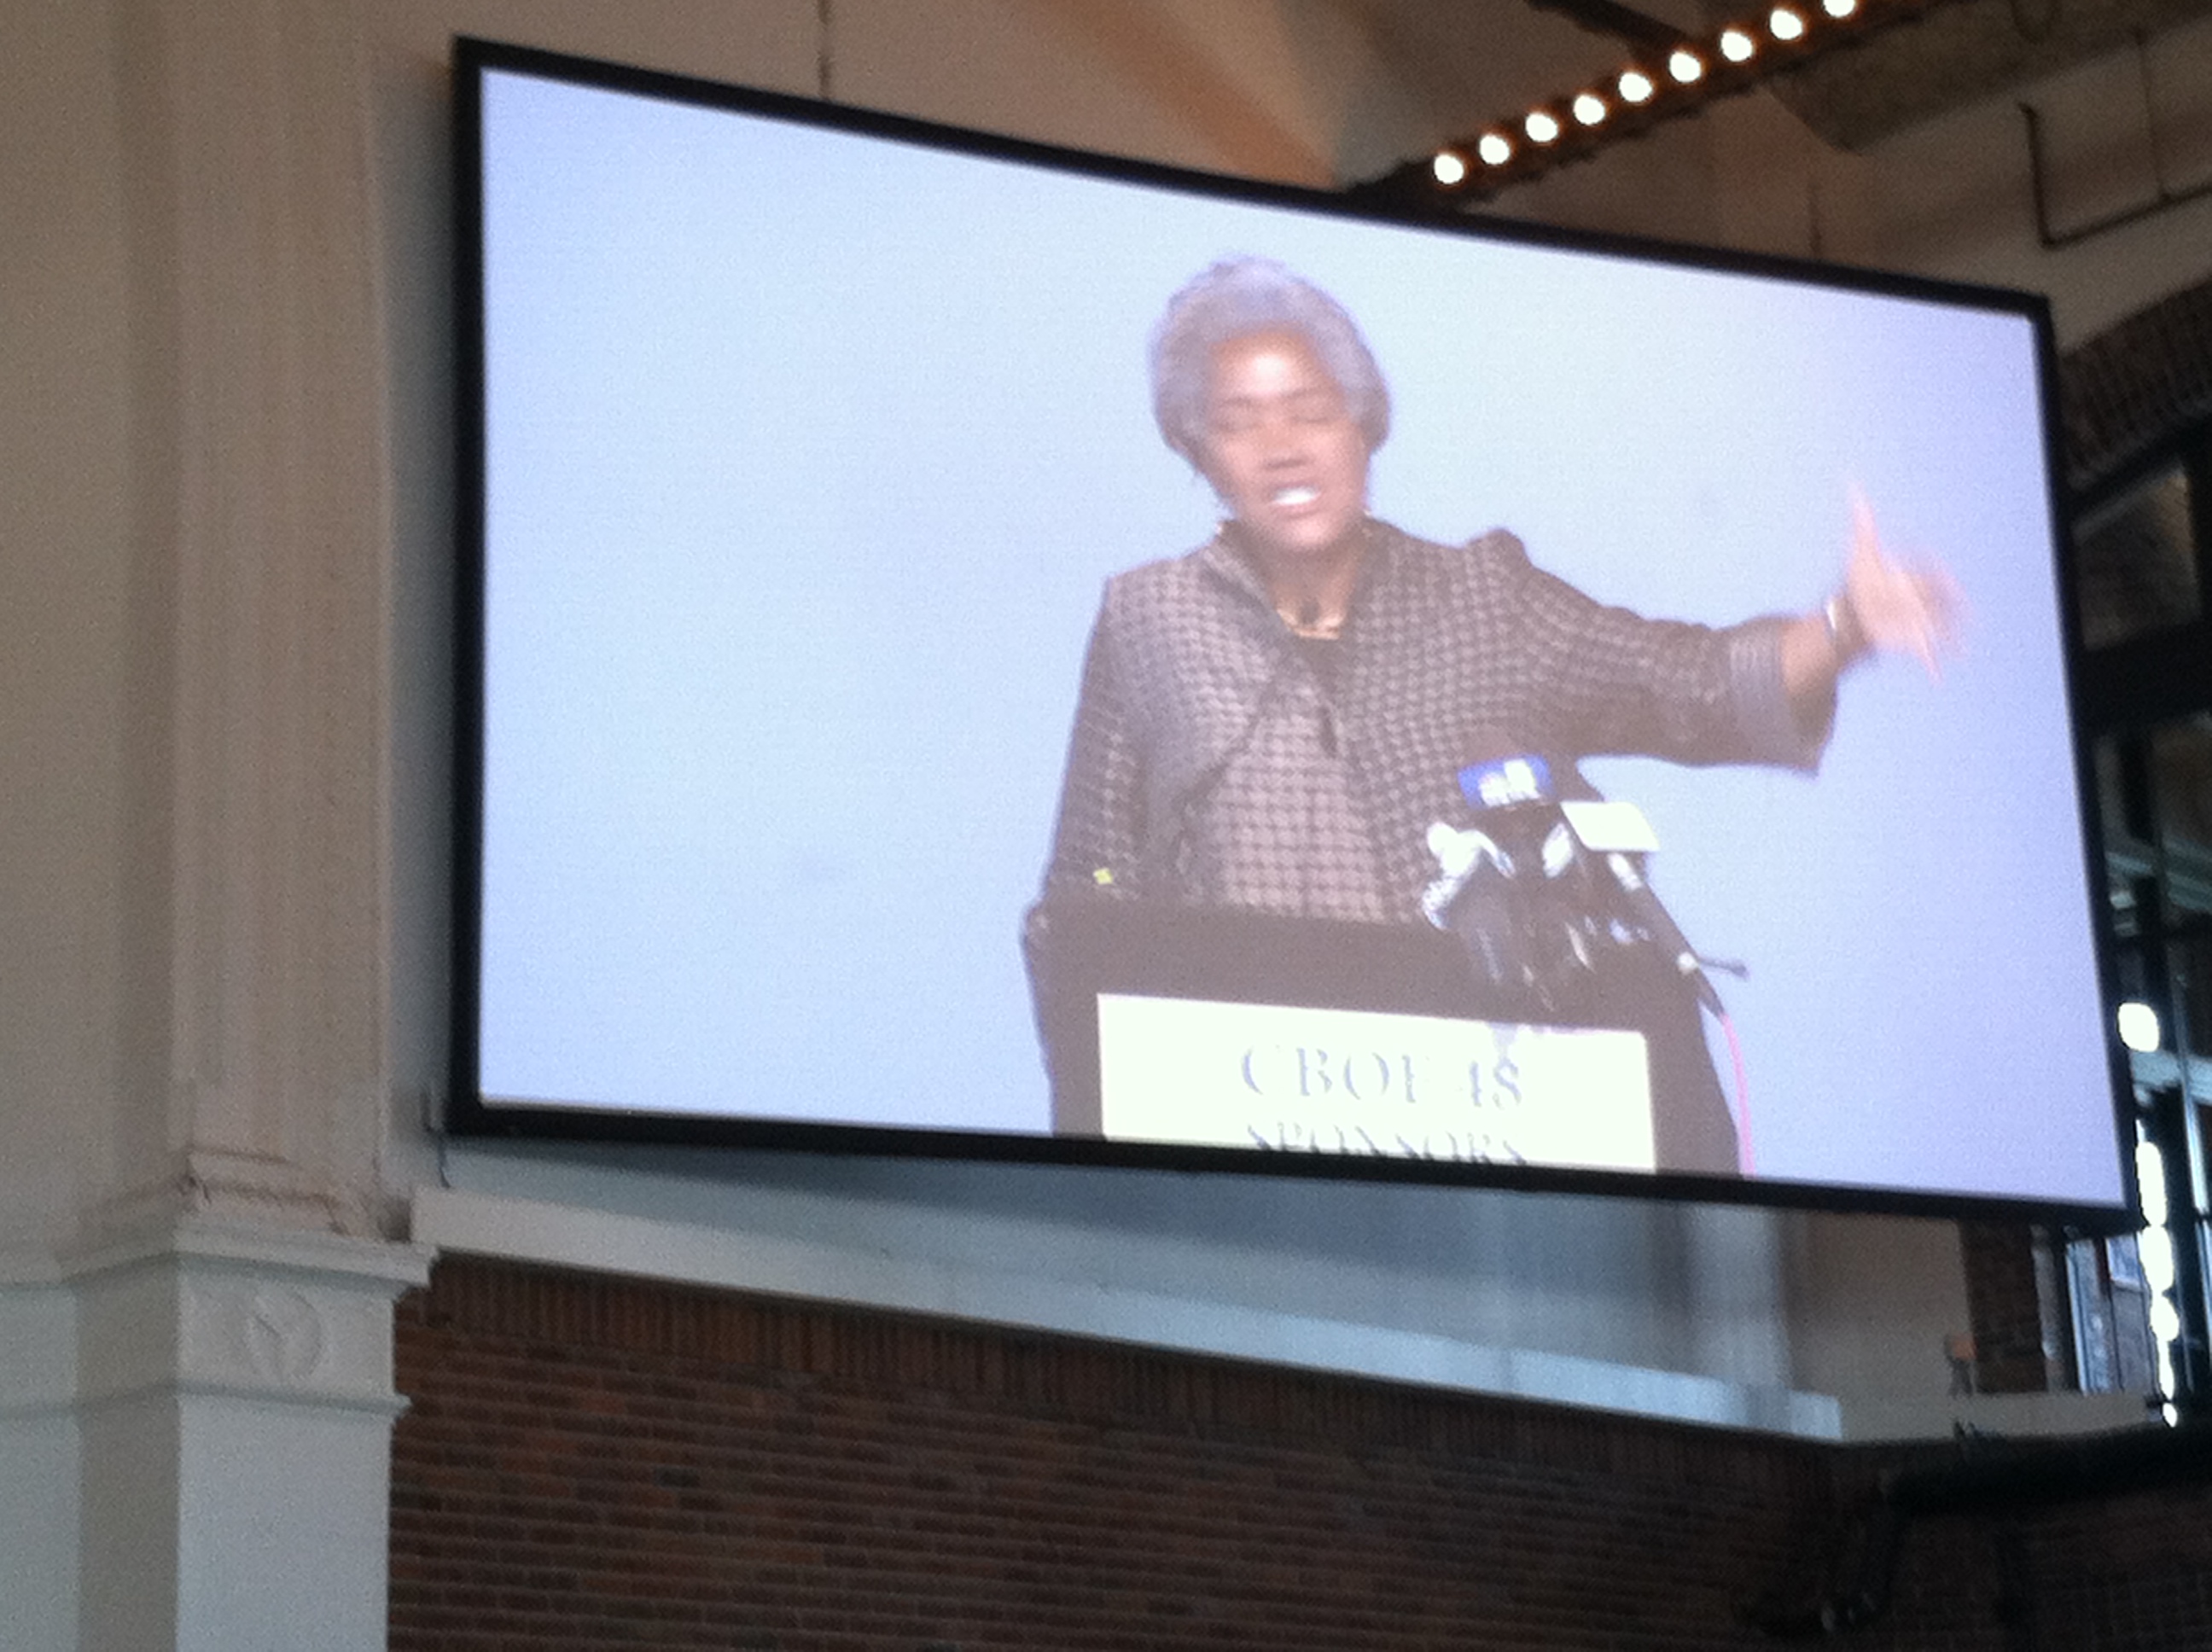 Donna Brazile on the big Screen at CBOF 48 Sponors Breakfast, Navy Pier , Chicago addressing Audience.